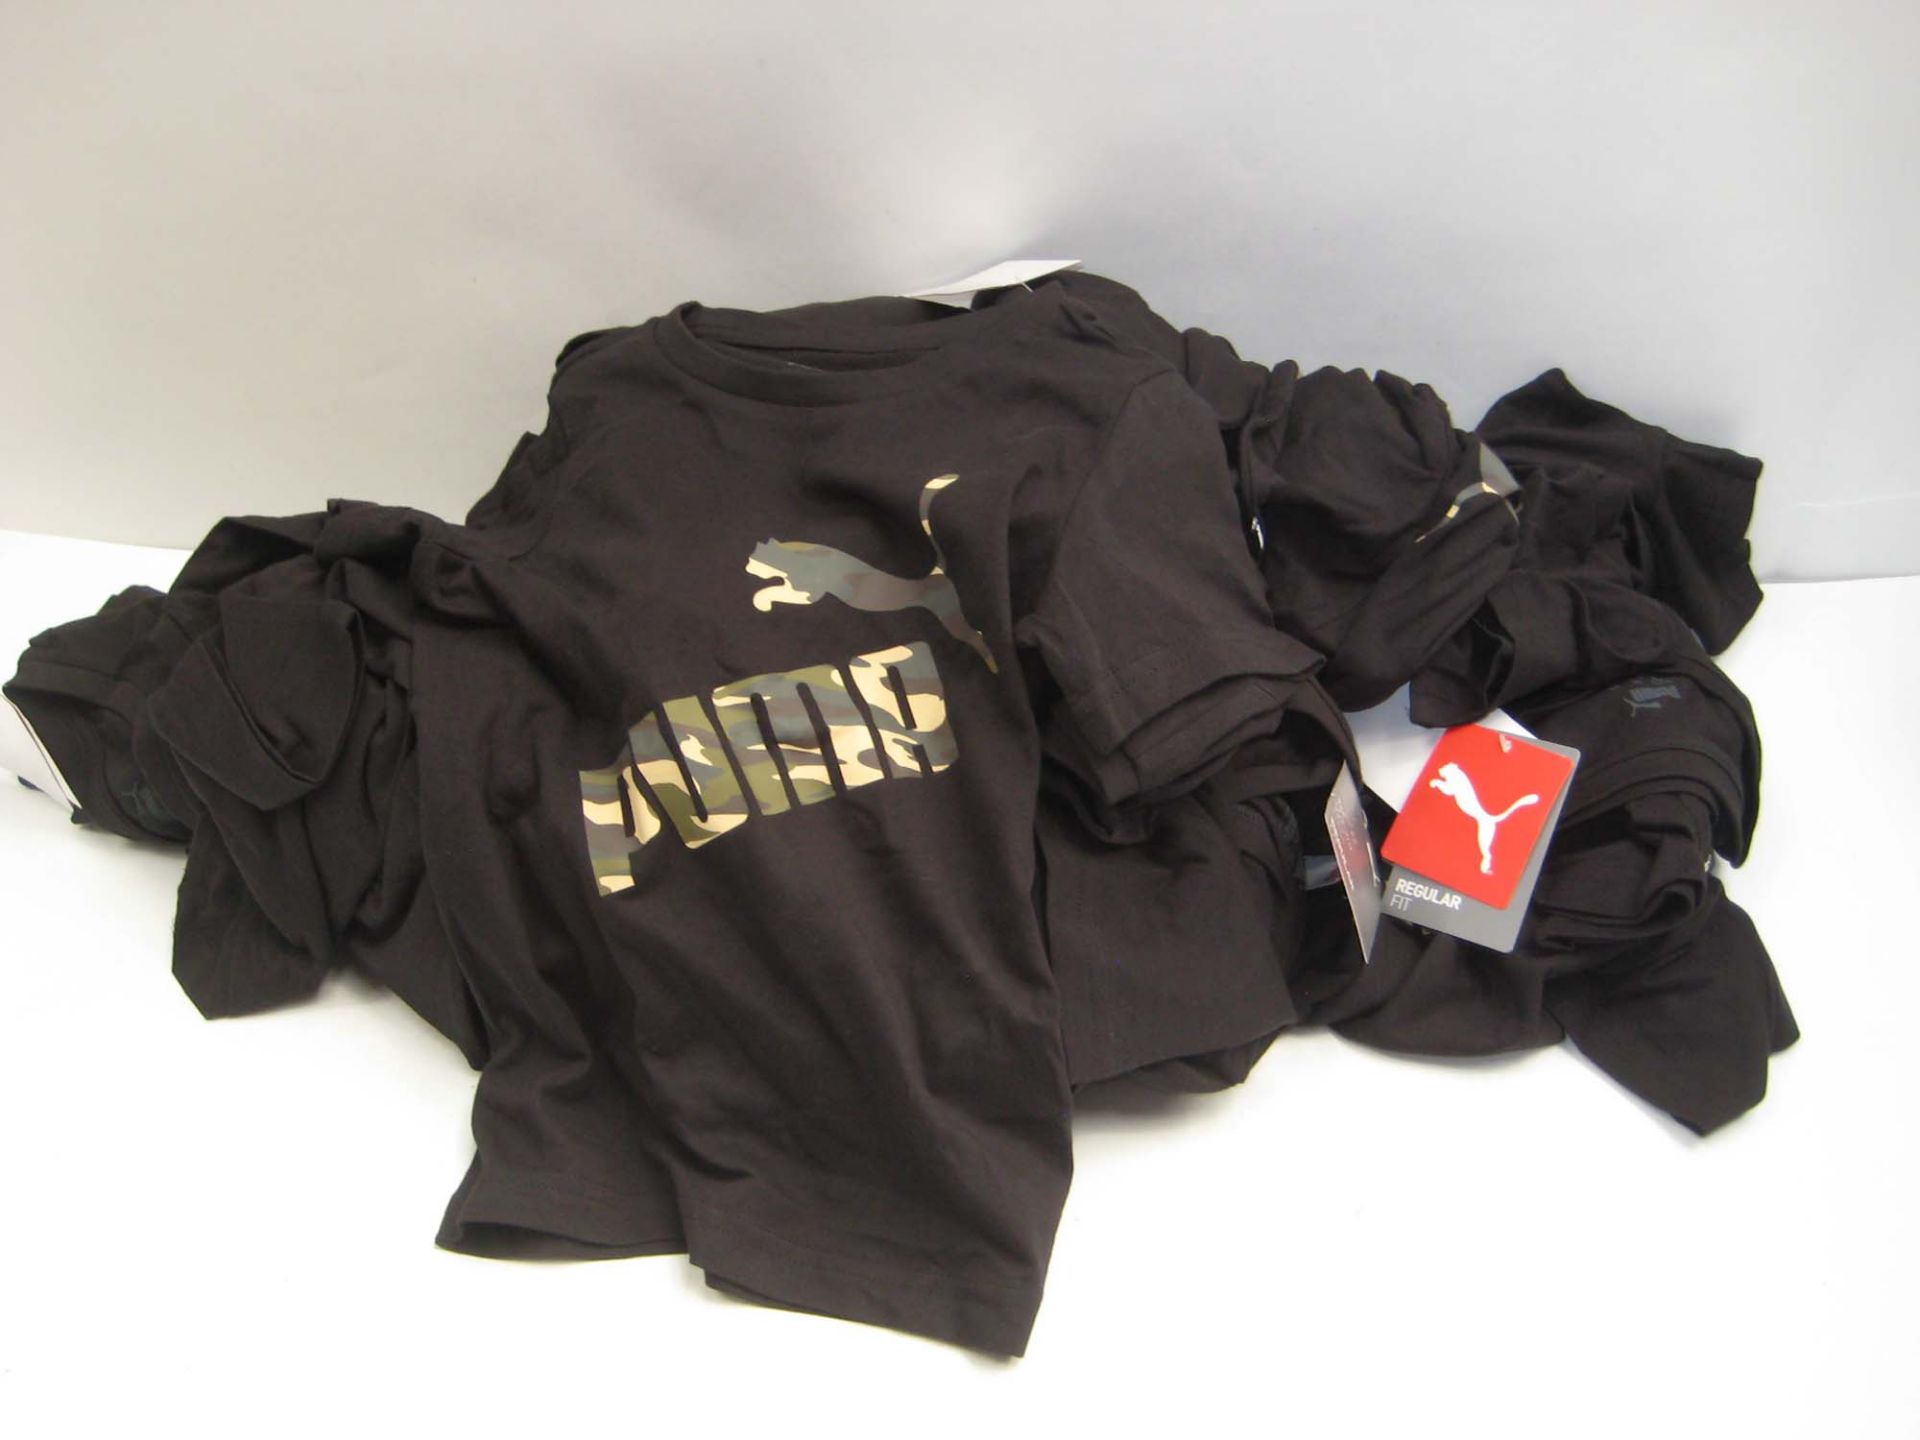 Bag containing childrens Puma t-shirts in white and black with camouflage Puma motif to the front